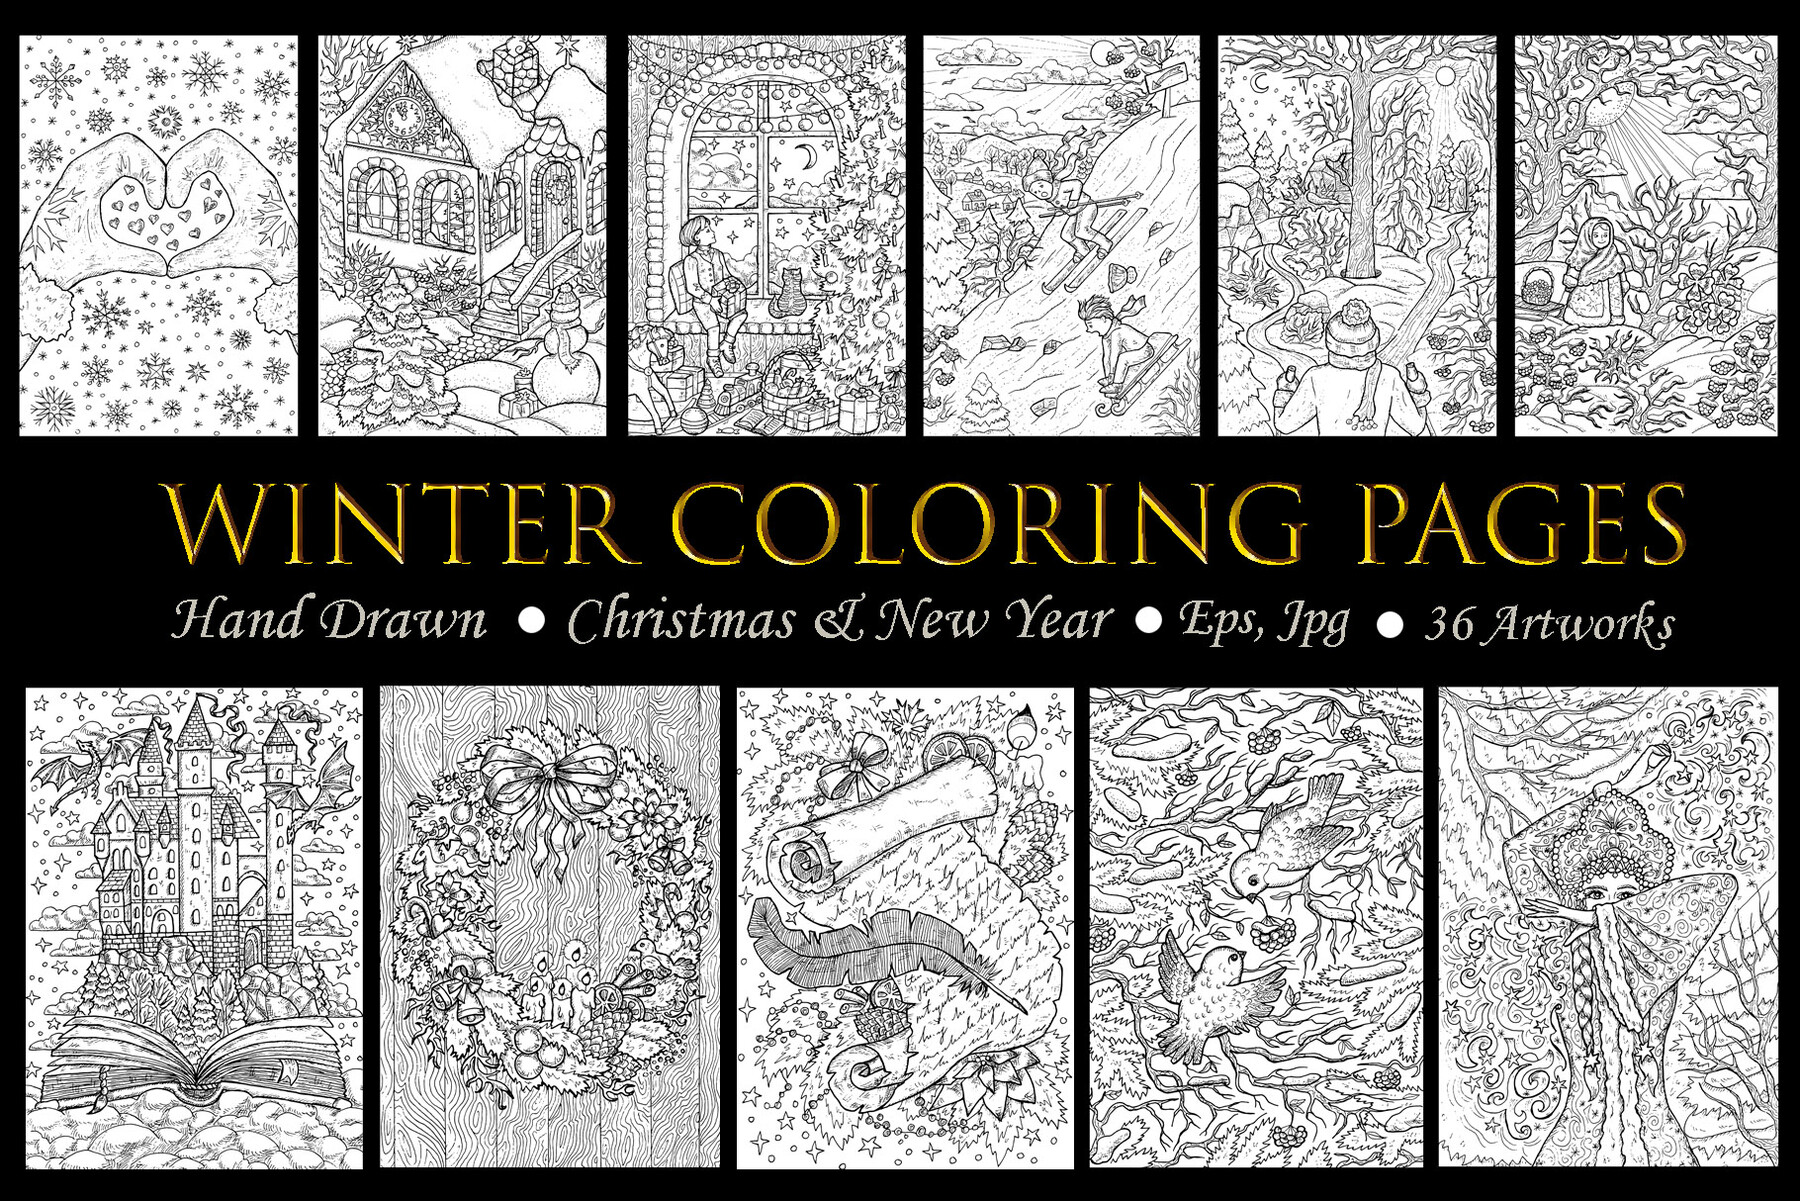 Animal Coloring Book Pages for Adults Graphic by Design Station